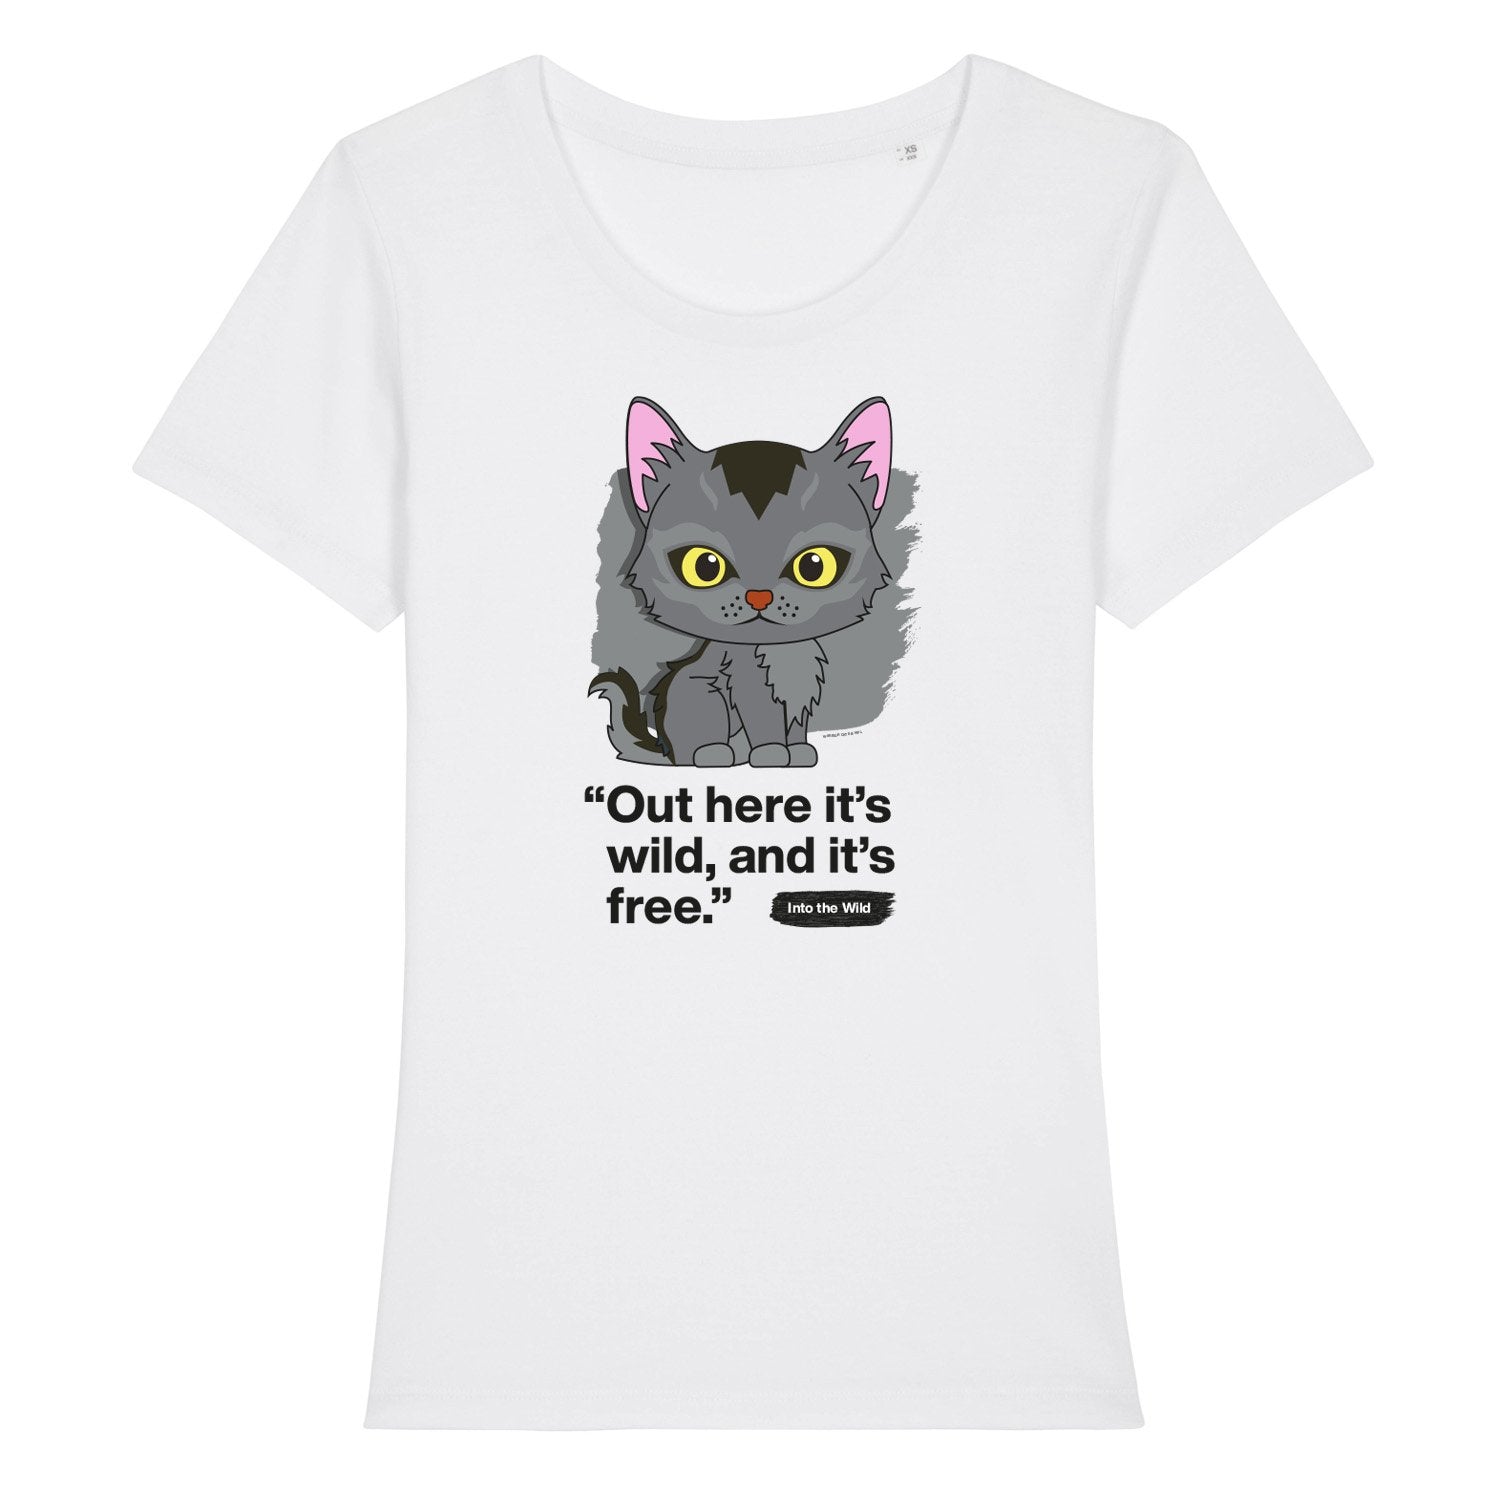 Out here it's wild - Graystripe - Adult Ladies T-Shirt